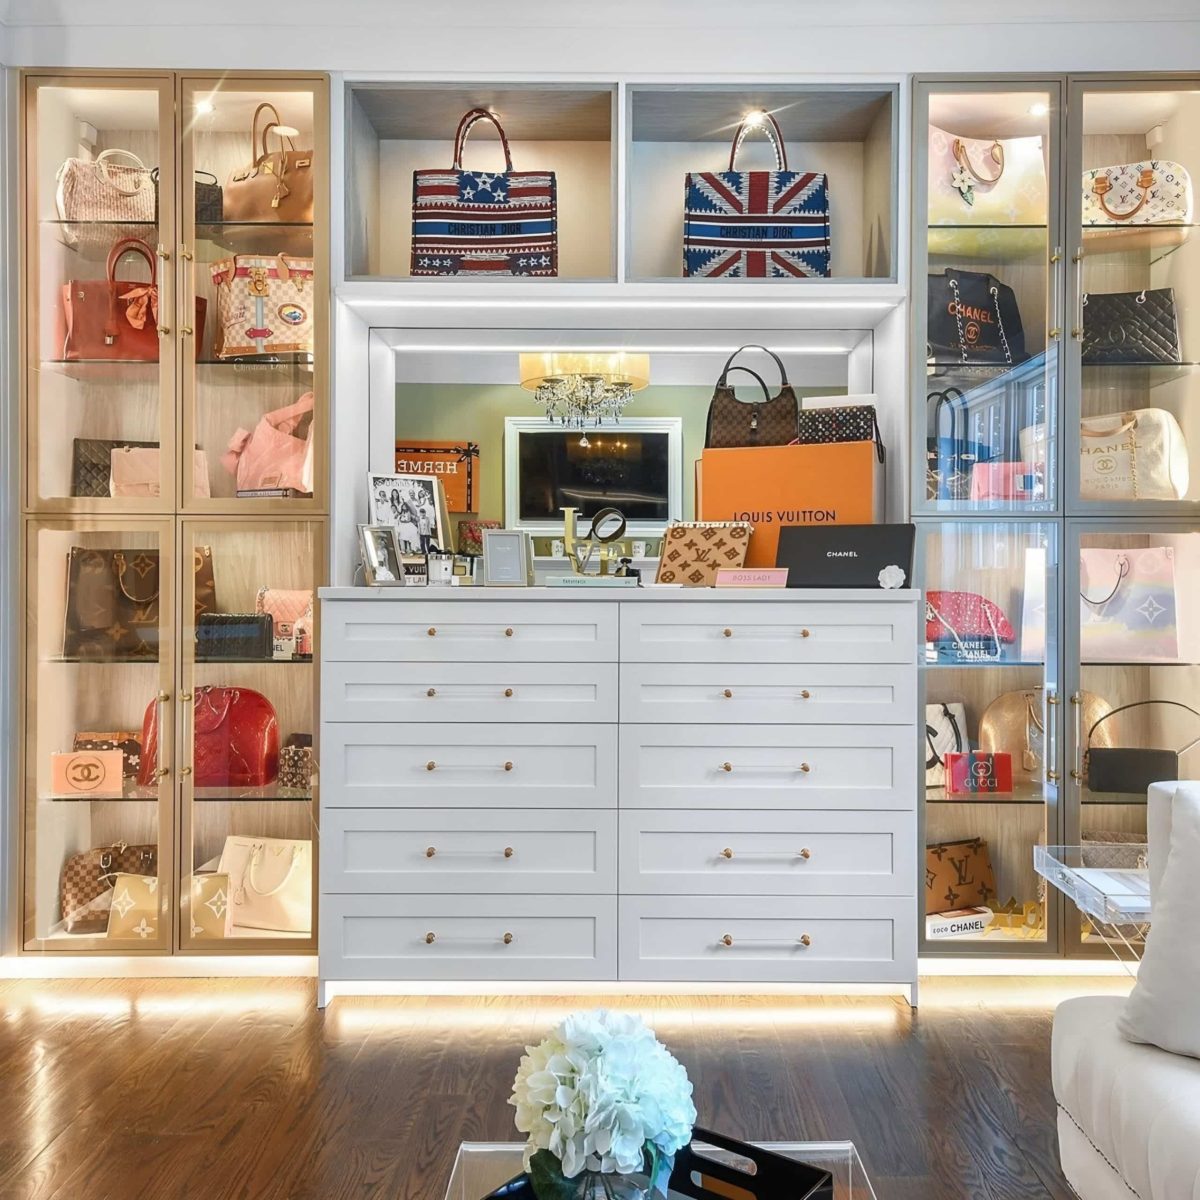 A London living room with a lot of bespoke purses on display, curated by Mr Wardrobe.